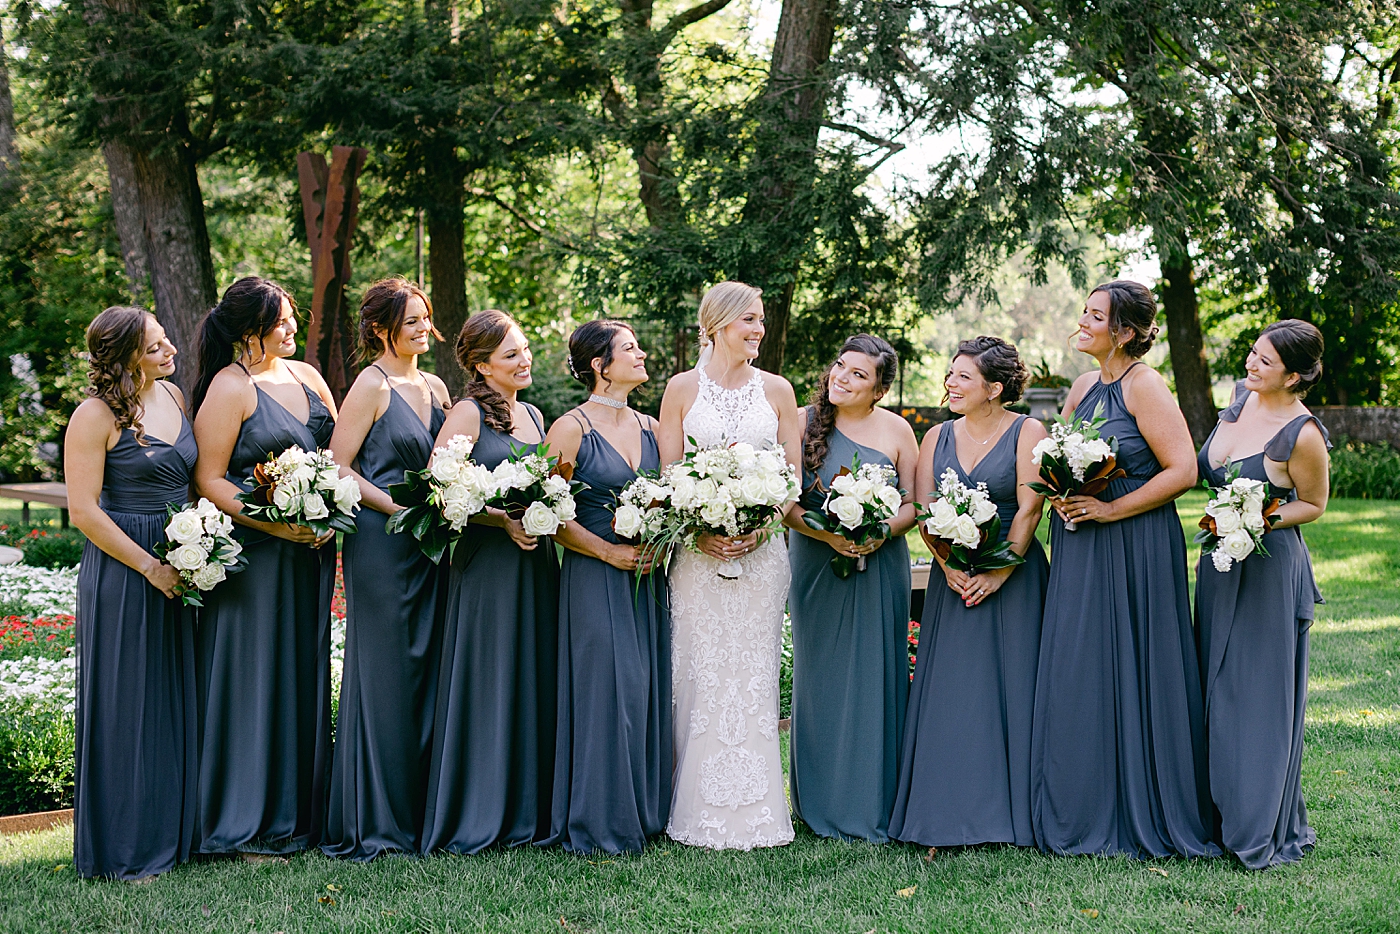 Bridal party in blue | Image by Hope Helmuth Photography